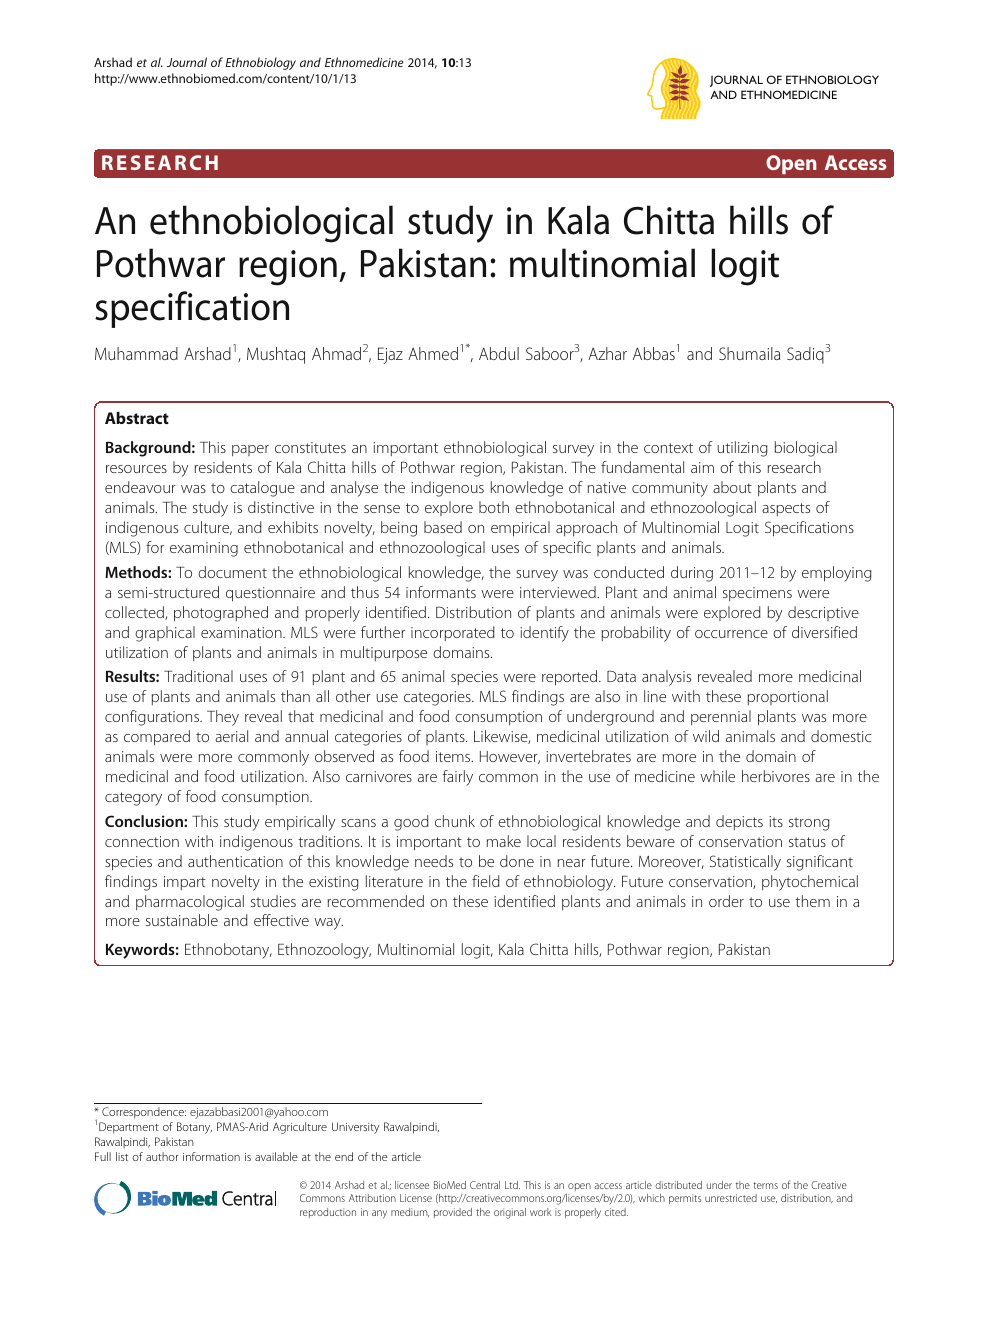 An ethnobiological study in Kala Chitta hills of Pothwar region, Pakistan:  multinomial logit specification – topic of research paper in Veterinary  science. Download scholarly article PDF and read for free on CyberLeninka